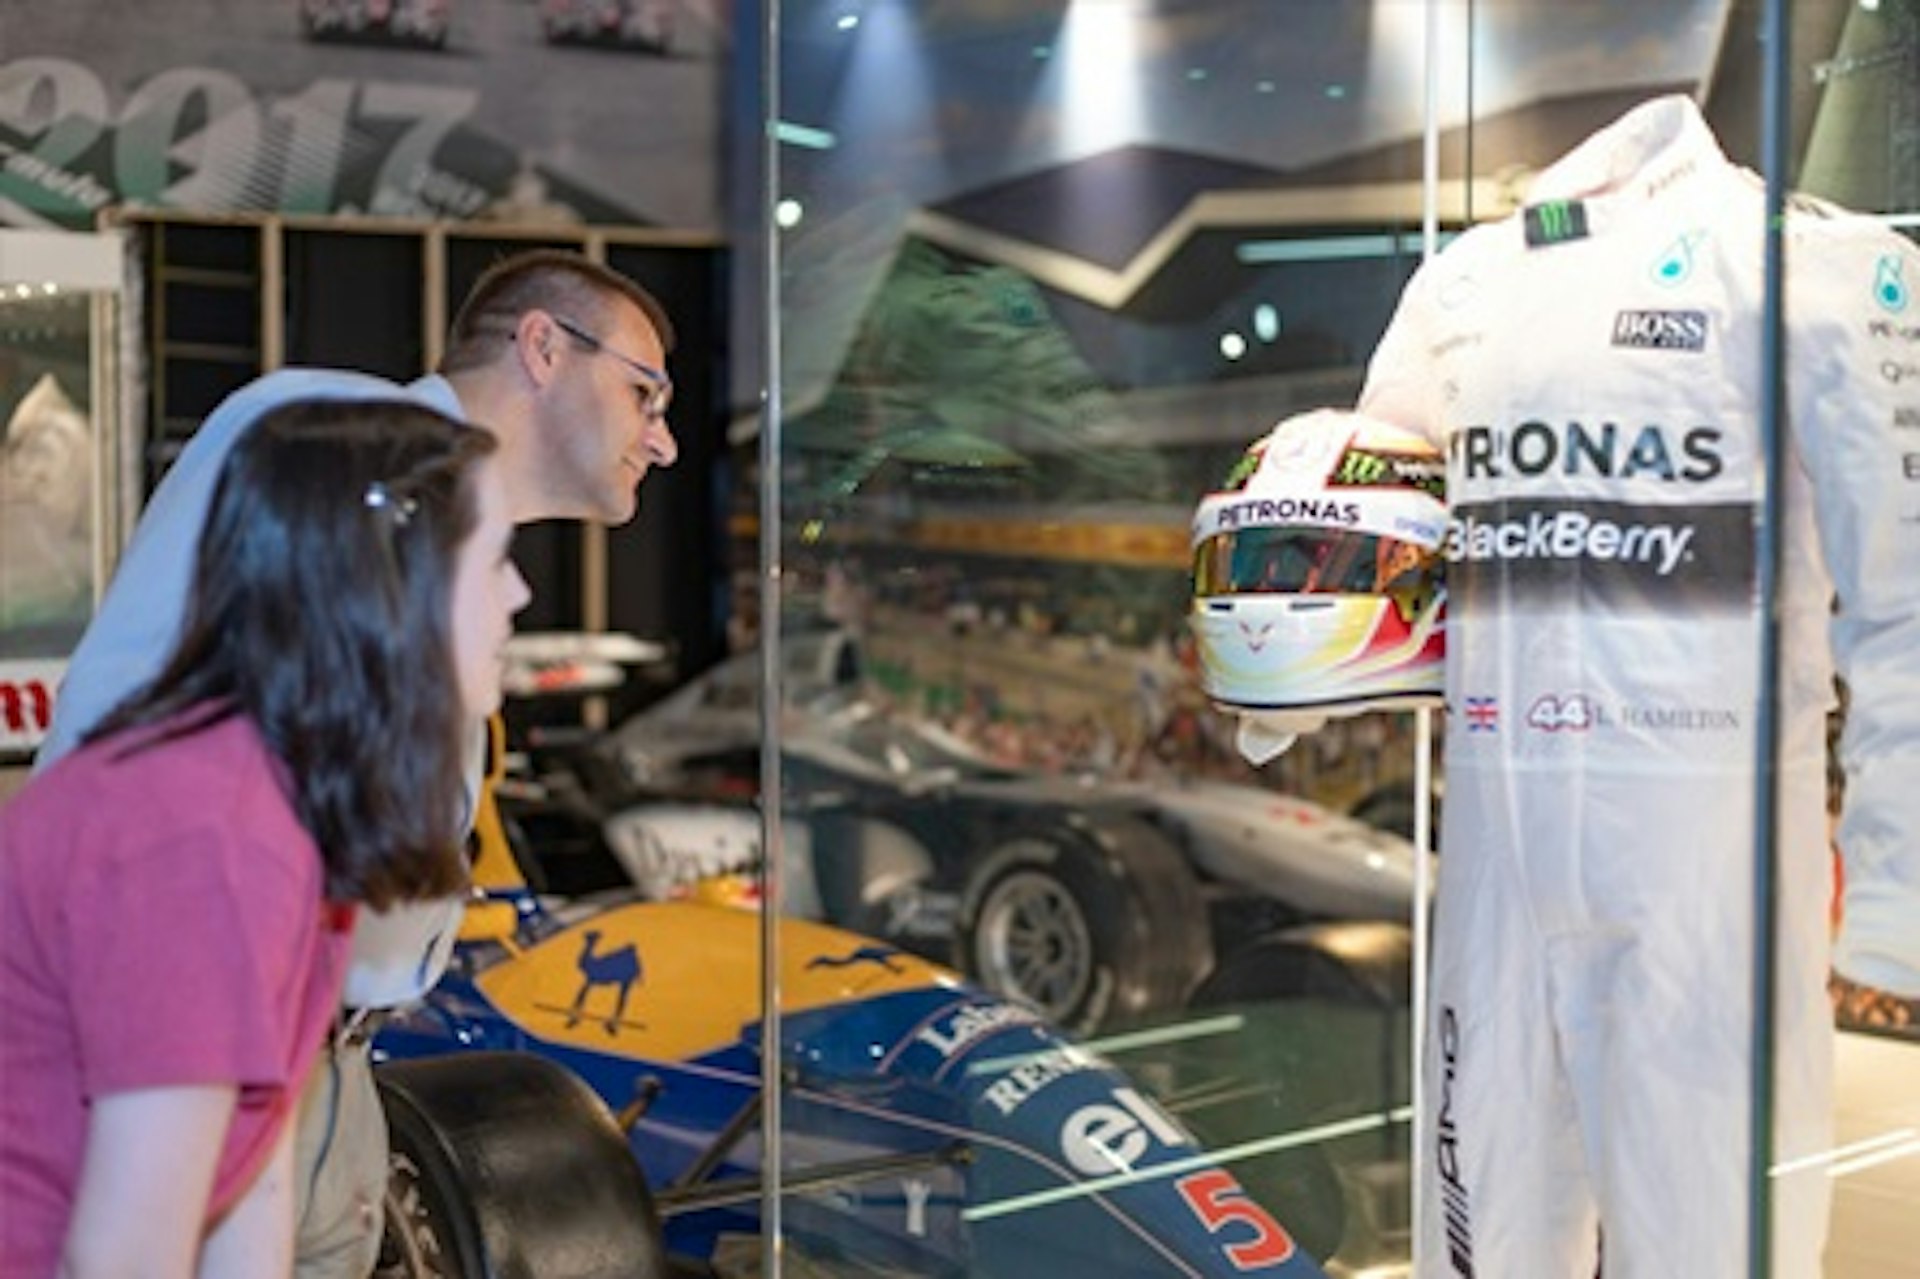 Family Visit to The Silverstone Interactive Museum - An Immersive History of British Motor Racing 4